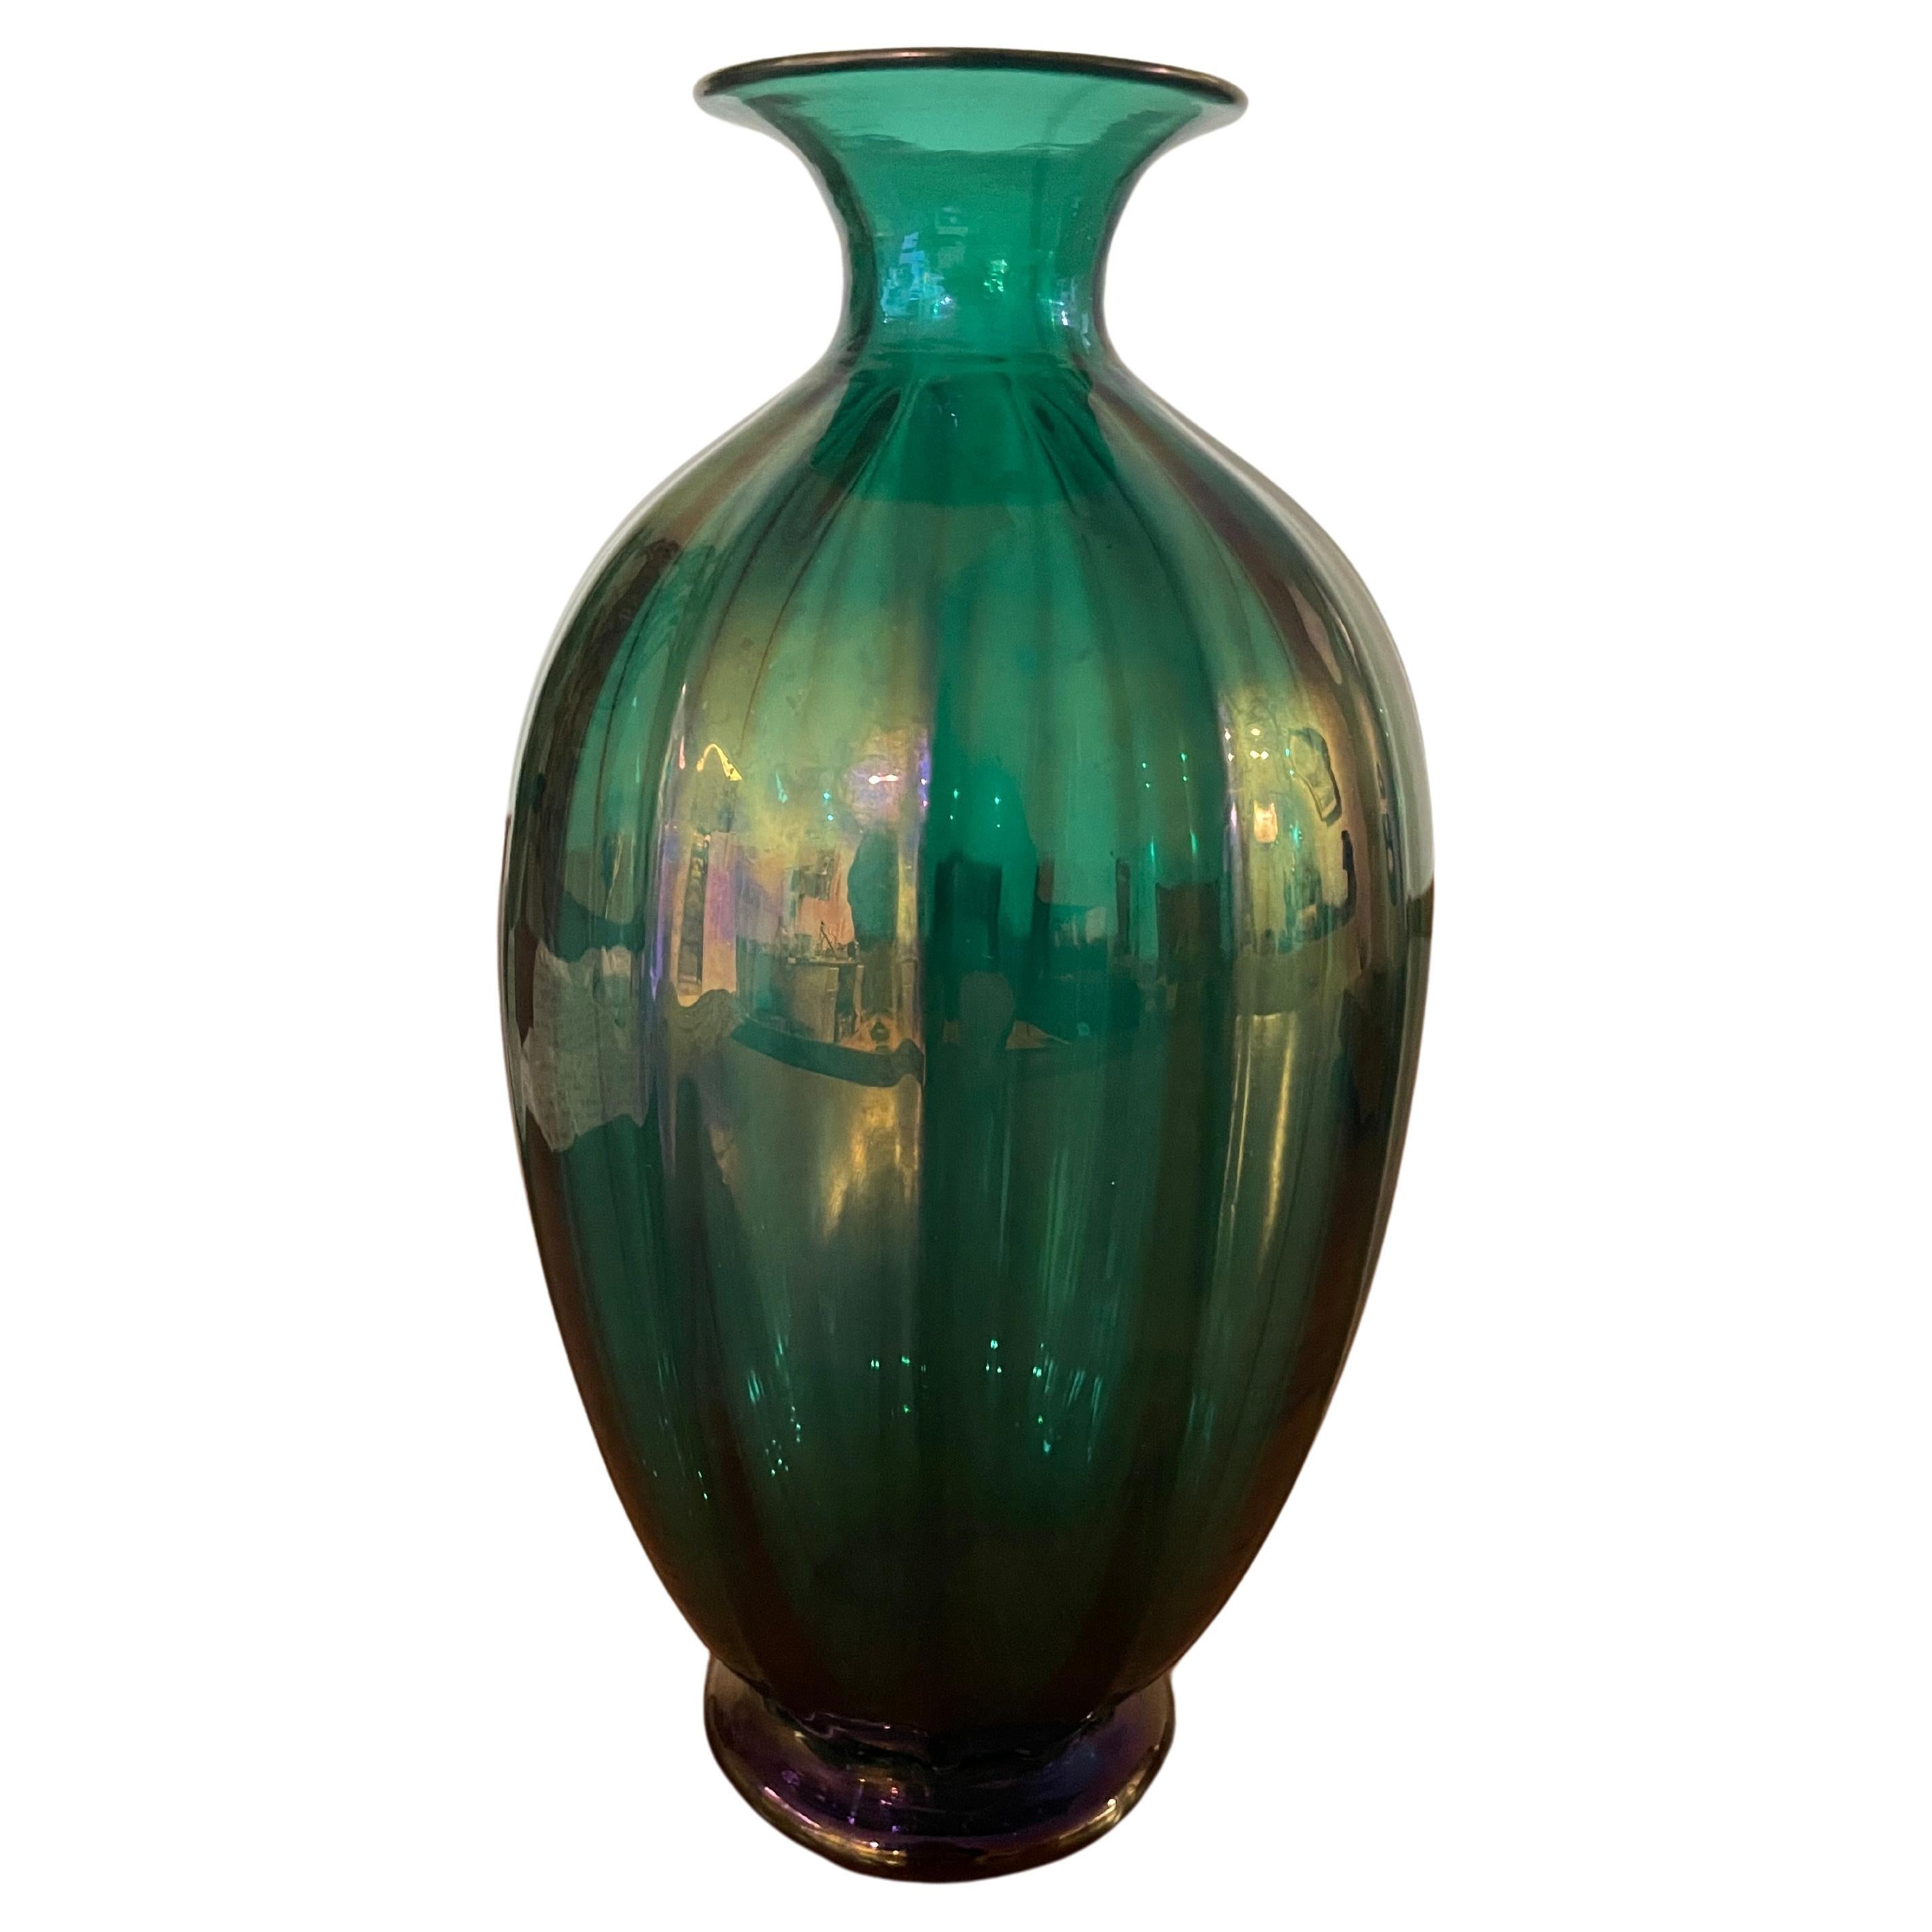 Archimede Seguso Vase, Green Glass with Iridescence, Serenella Signed  For Sale